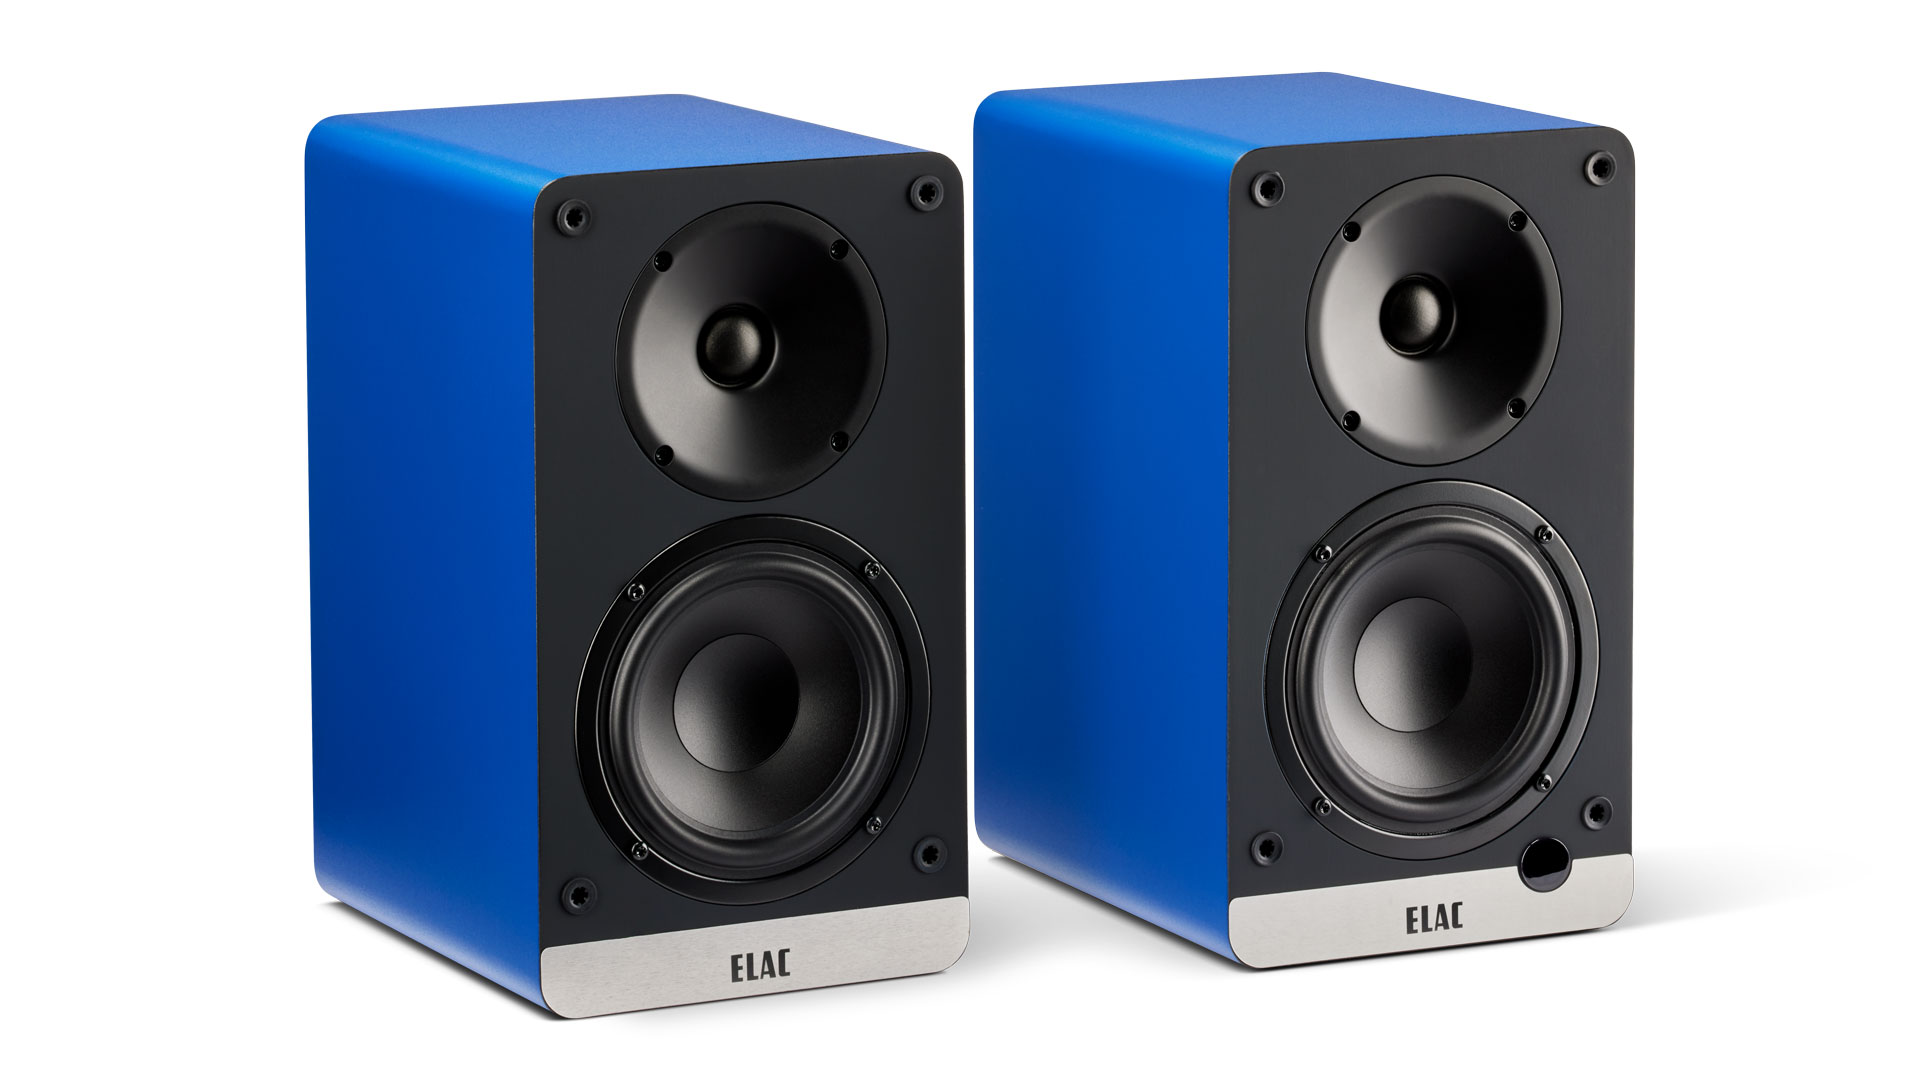 The new powered speakers ConneX DCB41 by ELAC in blue (Image Credit: ELAC)